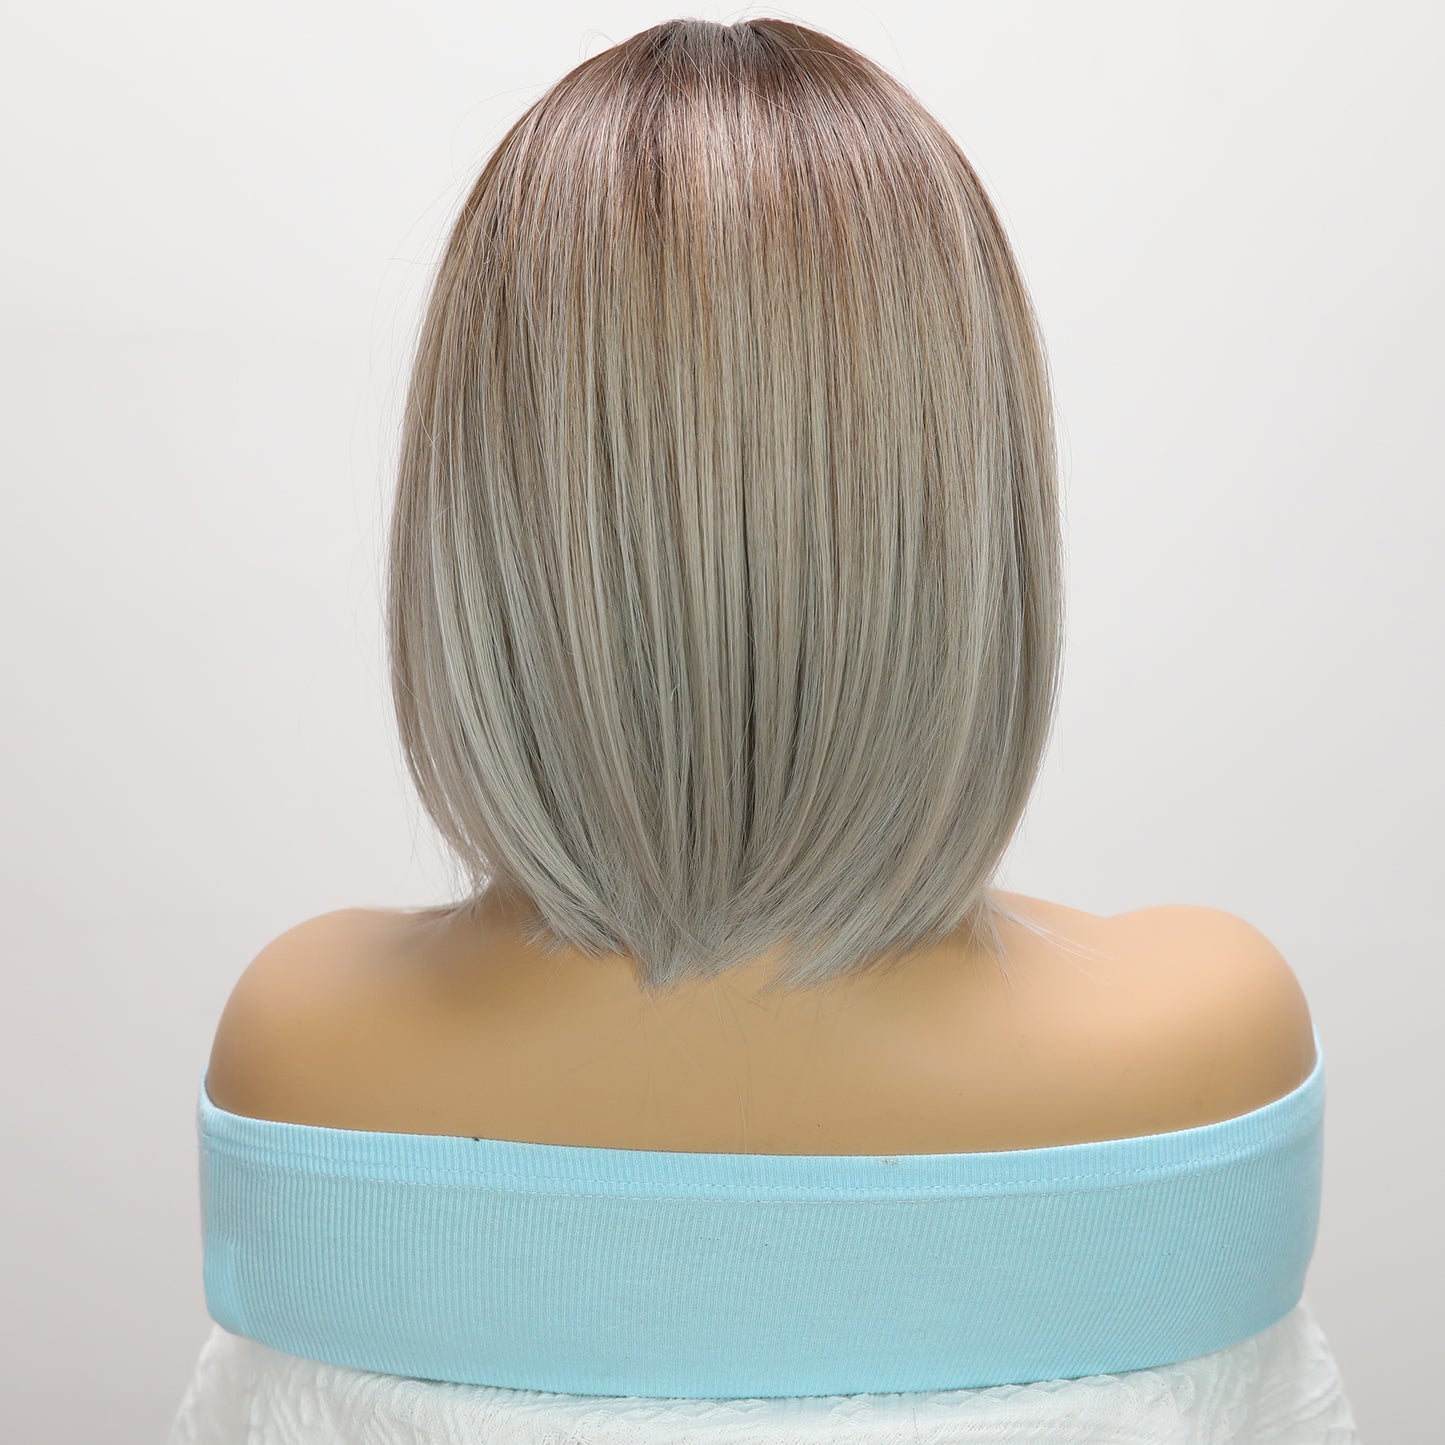 【Sophia】Buy 2 GET 1 free 10 Inches Omber Grey Costume Straight  Synthetic Wig